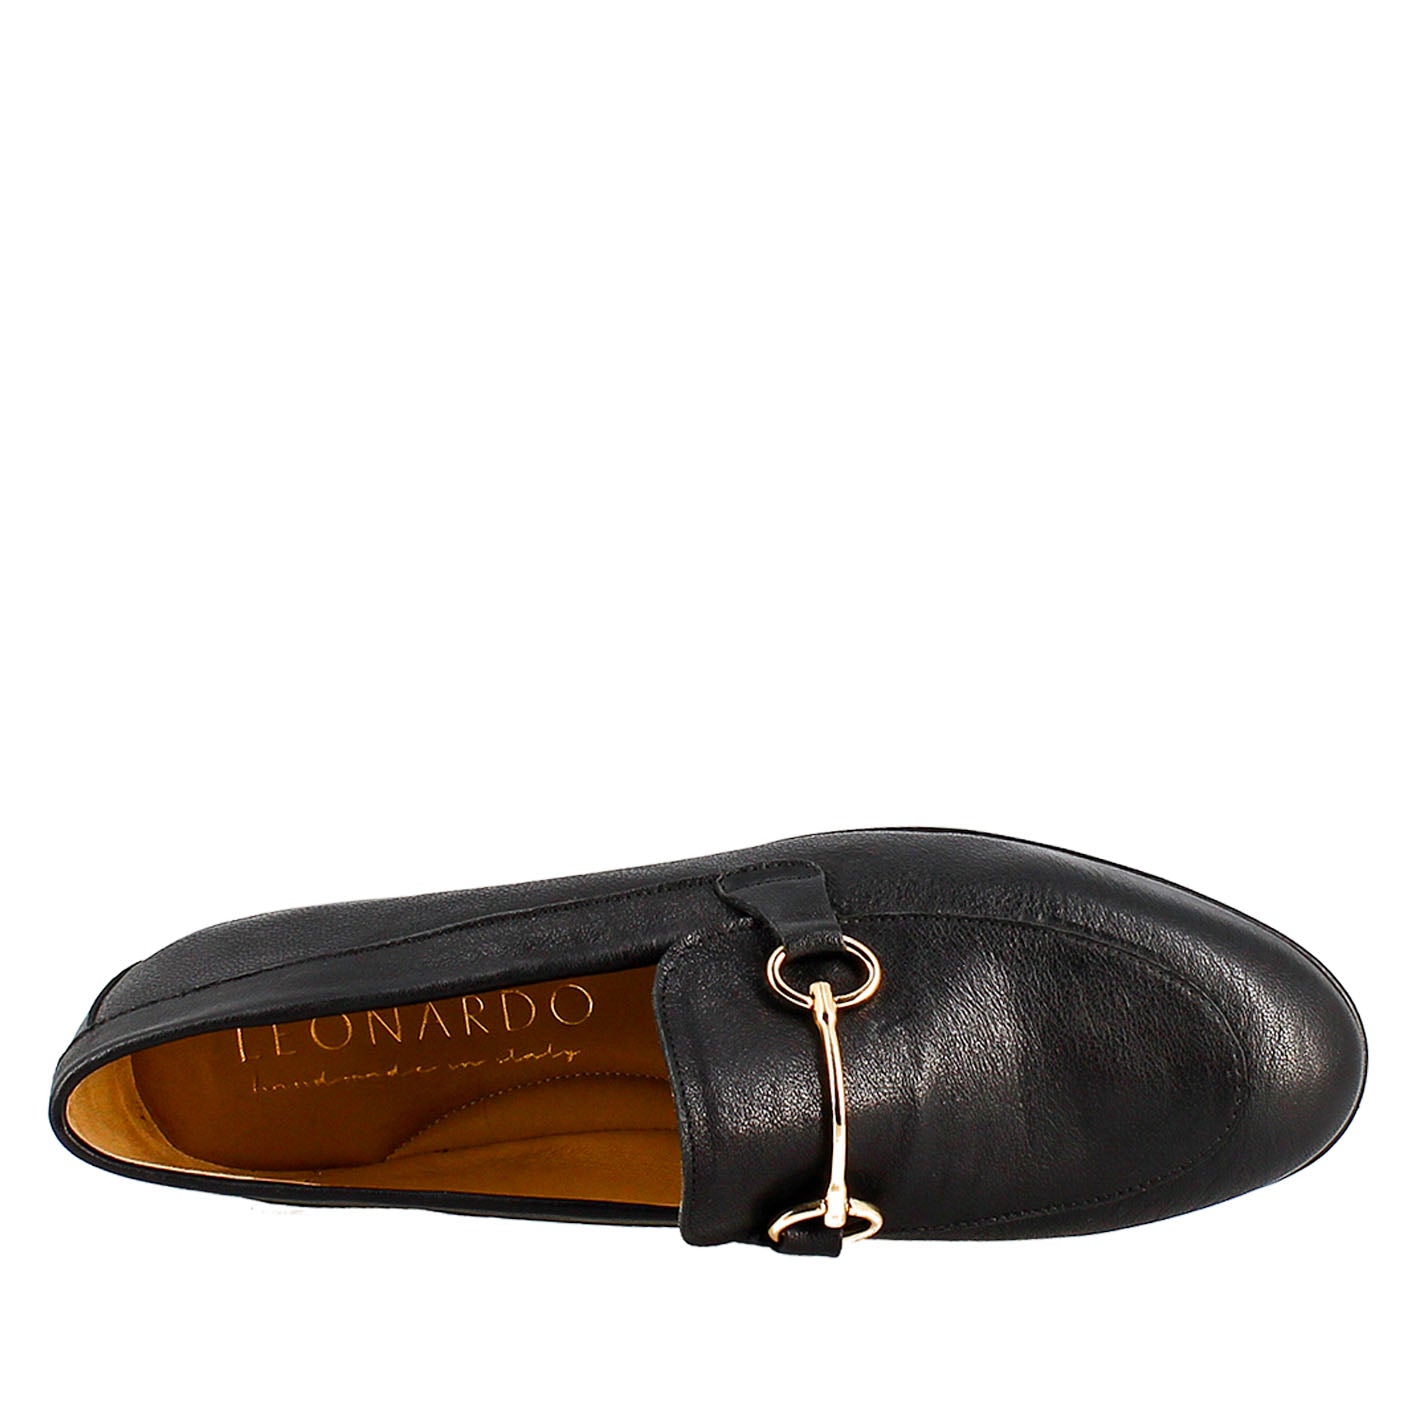 Women's moccasin in black leather with gold clamp